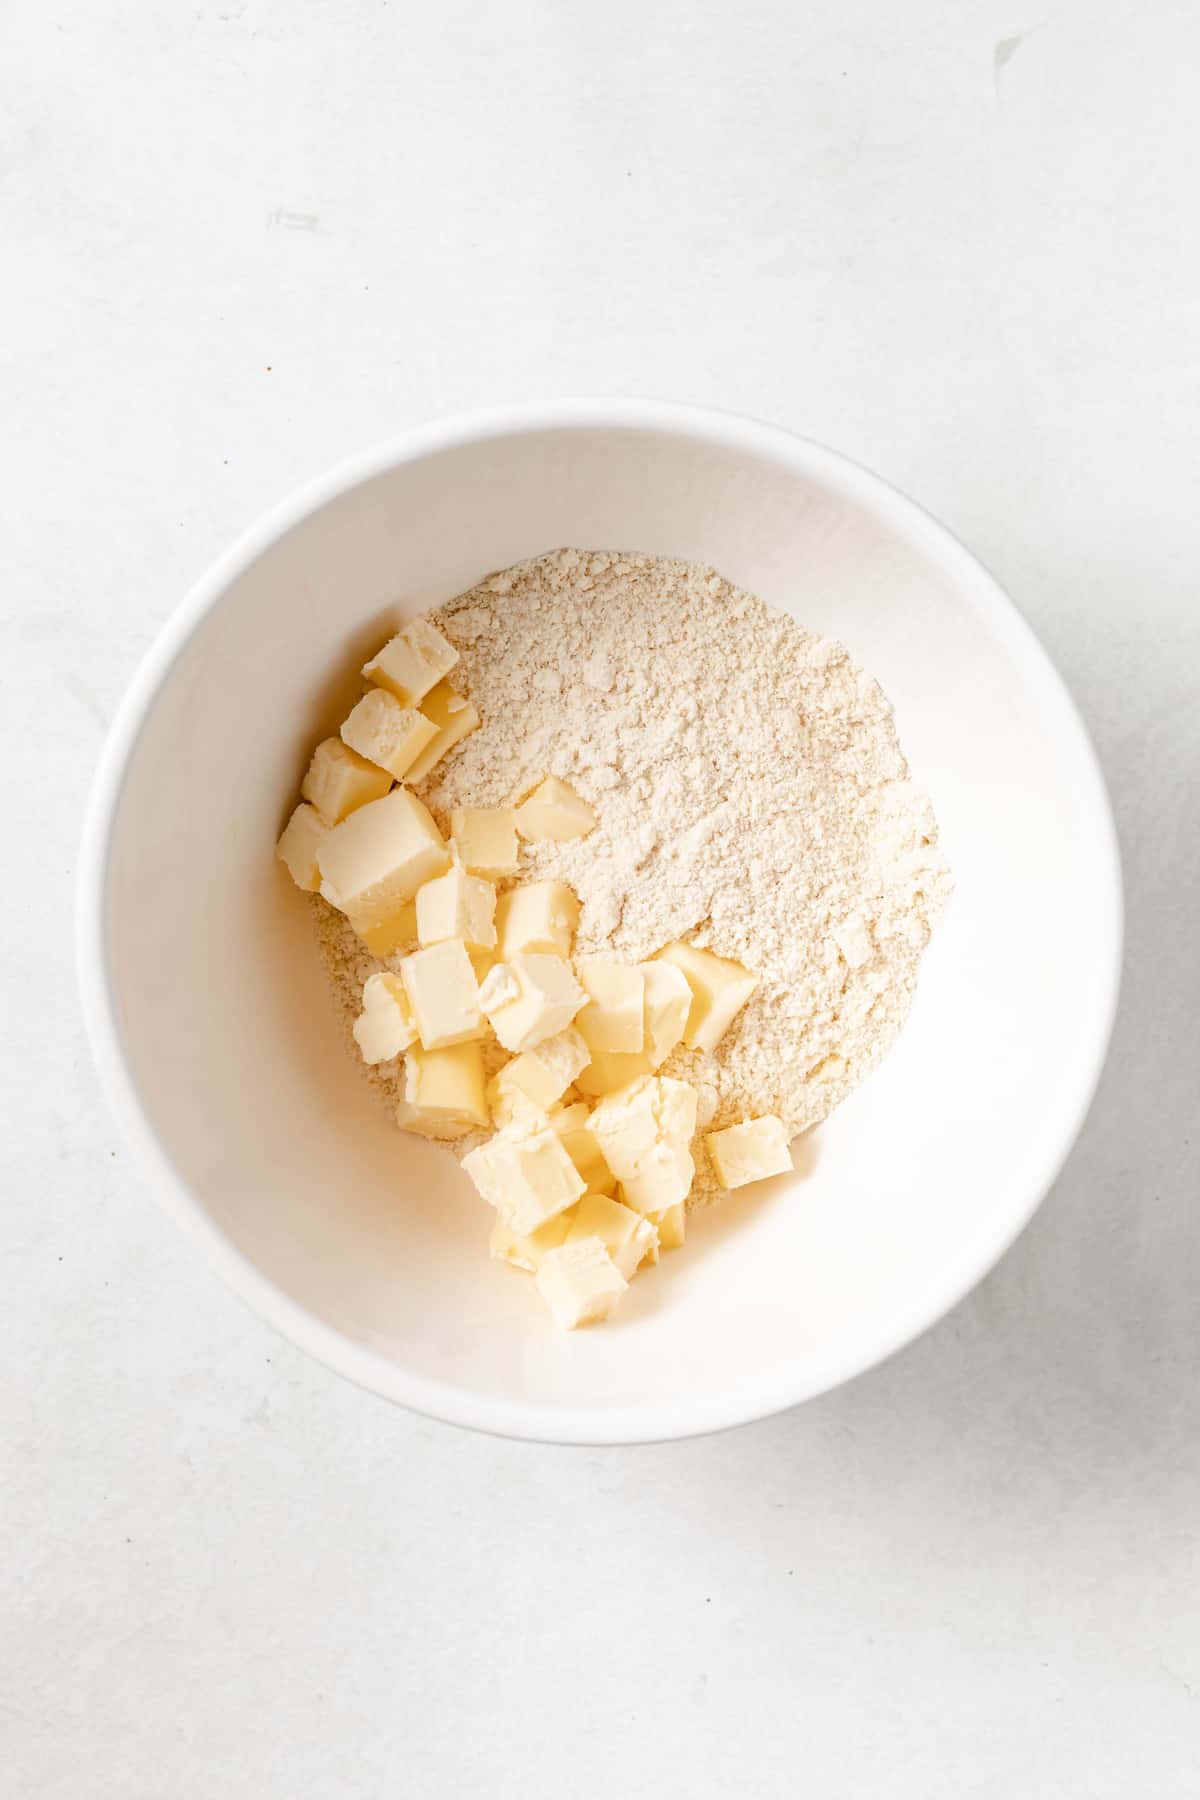 almond flour, coconut flour, tapioca flour and butter in a mixing bowl.